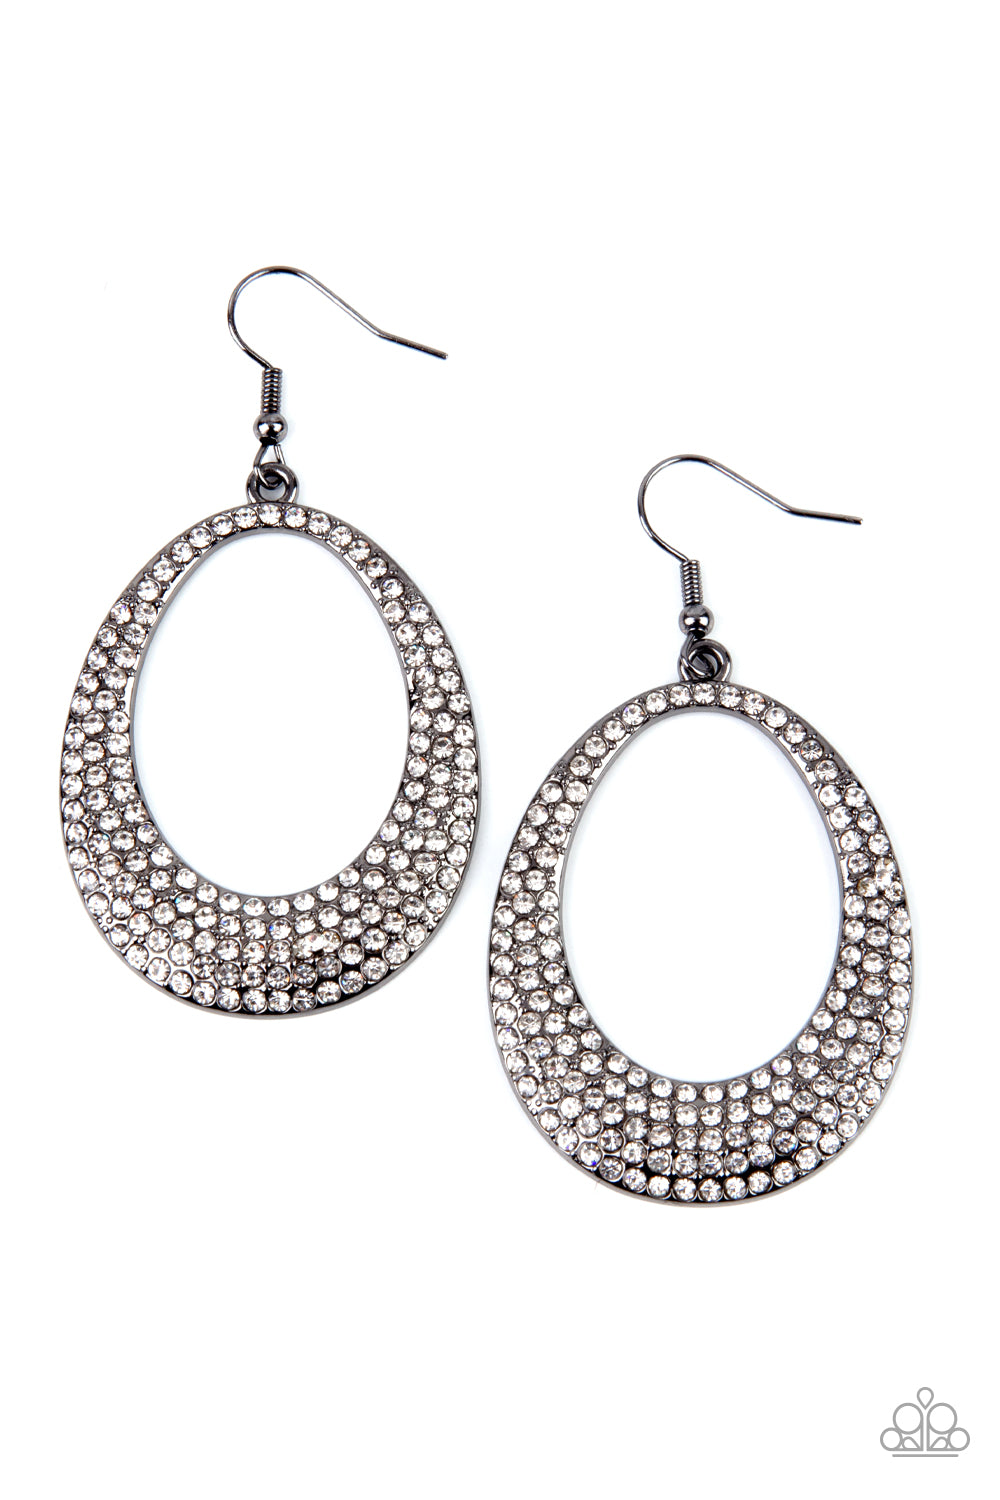 Storybook Bride Black Earring - Paparazzi Accessories  Shiny gunmetal oval frames with airy cut-out centers, are covered in brilliant white rhinestones, creating an enchanting lure. Earring attaches to a standard fishhook fitting.  All Paparazzi Accessories are lead free and nickel free!  Sold as one pair of earrings.